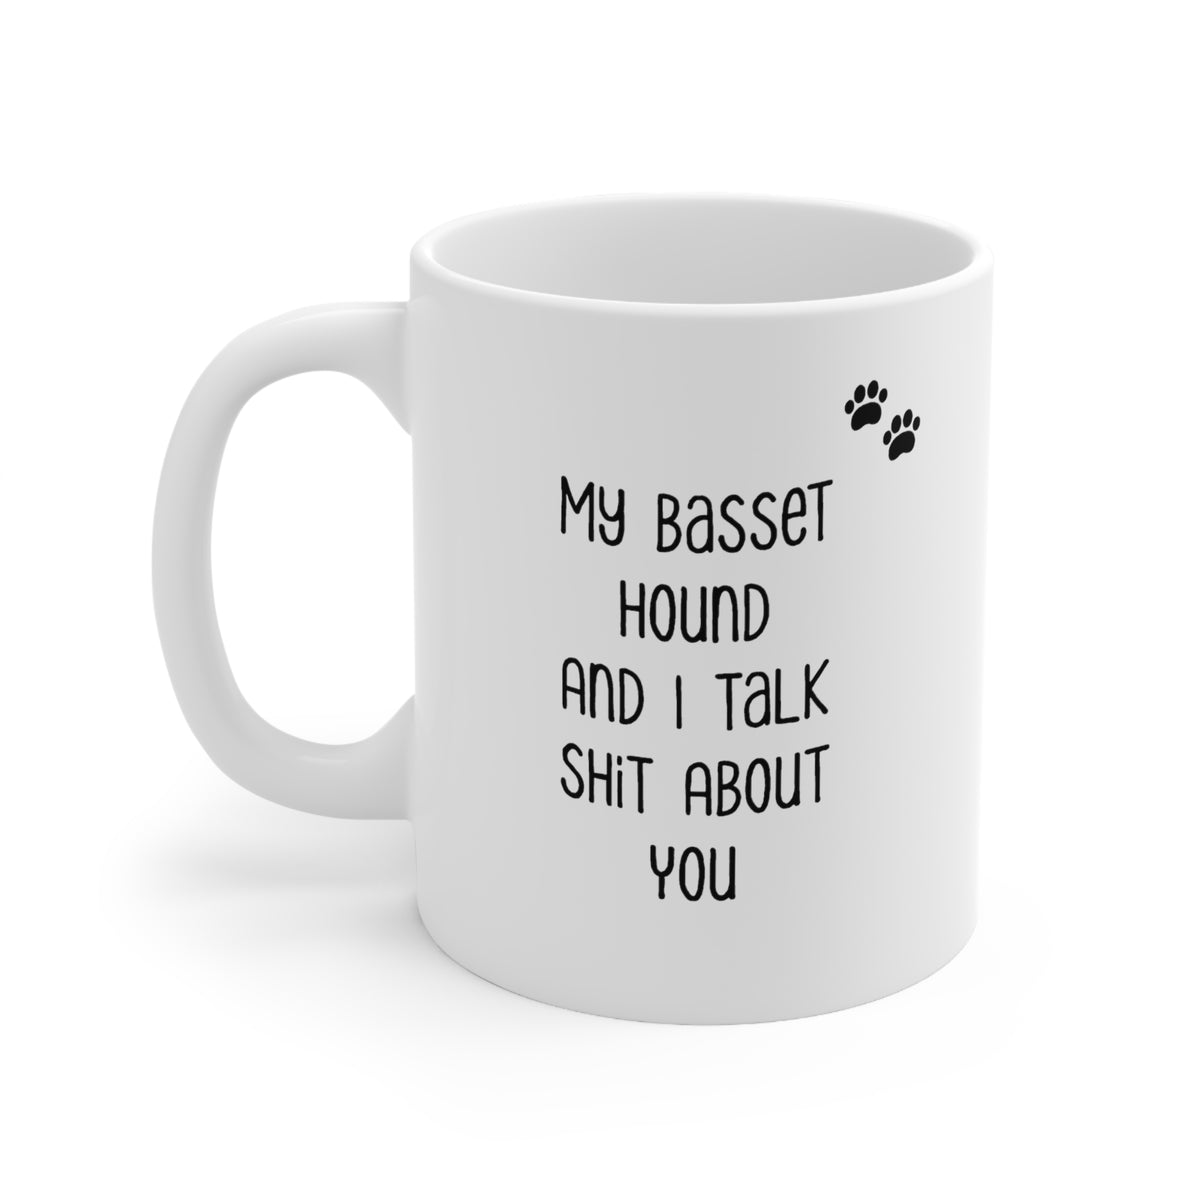 Basset Hound Coffee Mug - My Dog and I Talk Shit About You - Funny Sarcasm Gifts for Mom and Dad